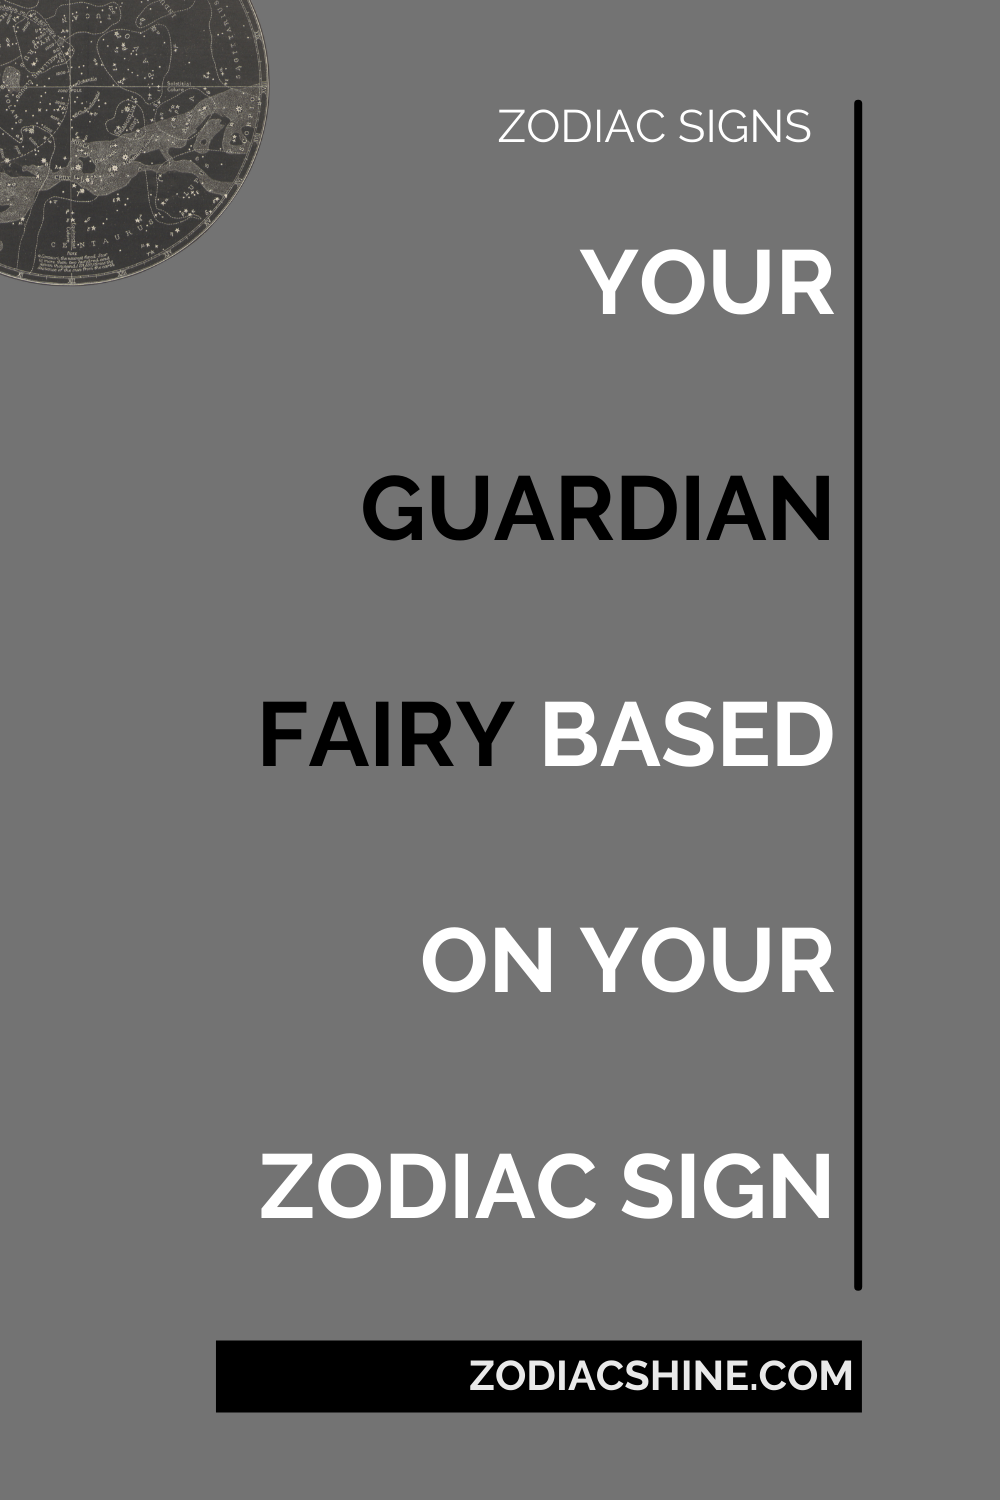 Your guardian fairy based on your zodiac sign